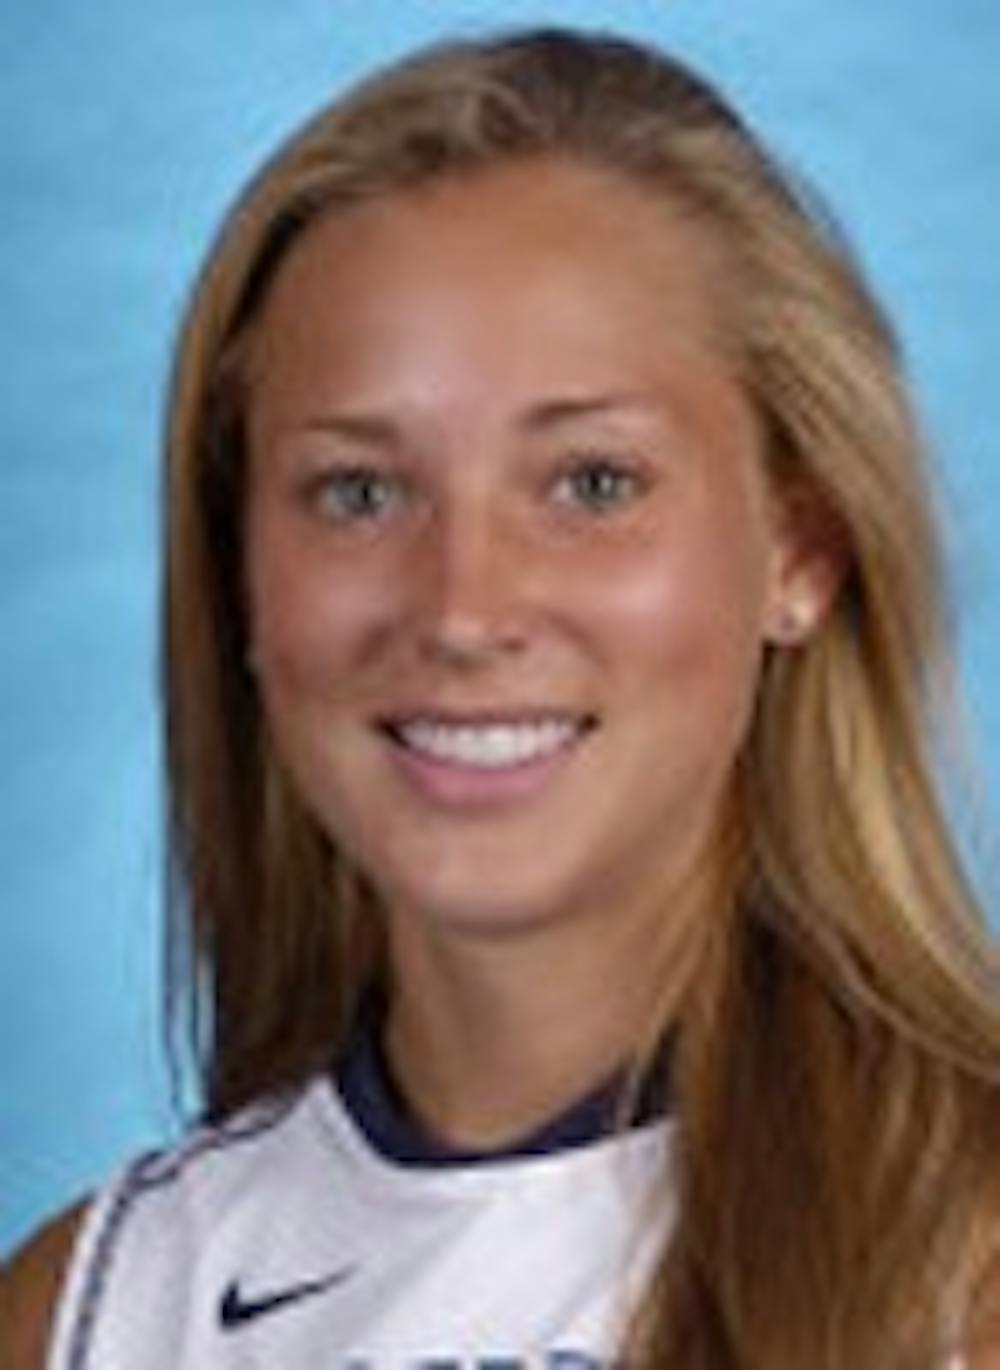 UNC field hockey player Meghan Lyons organized the project.